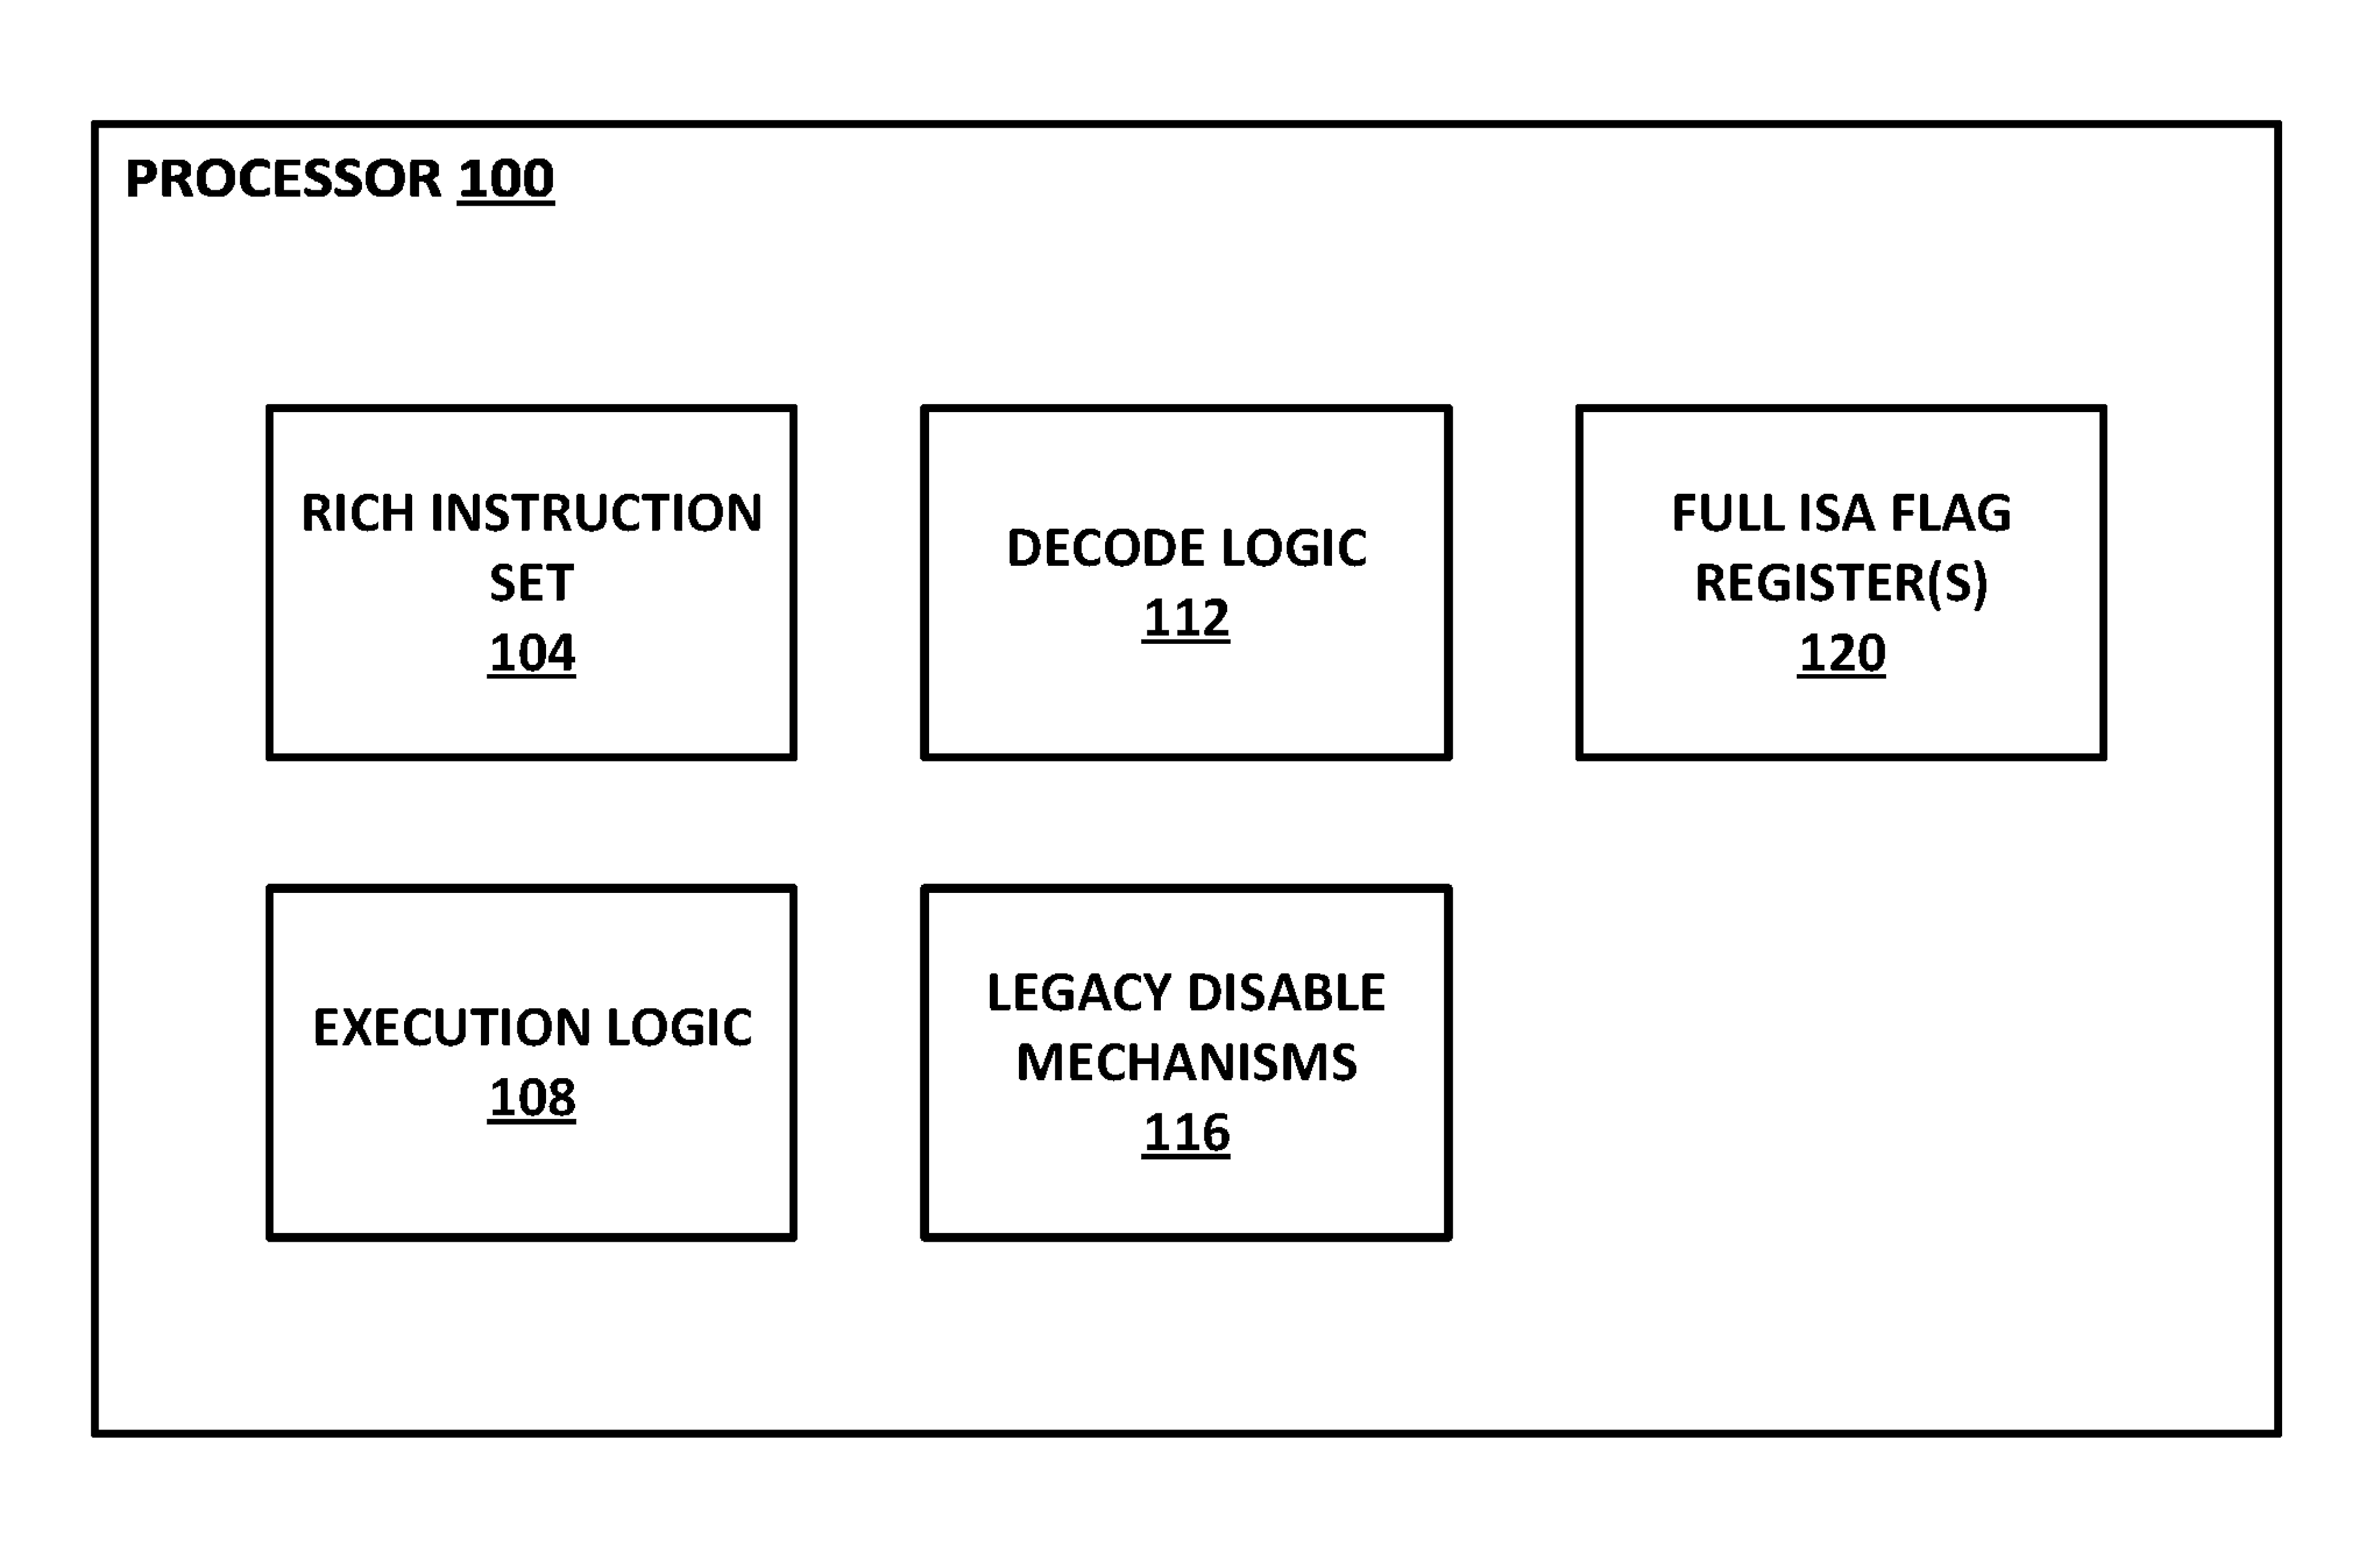 Block diagram of a processor containing the full ISA flag registers.